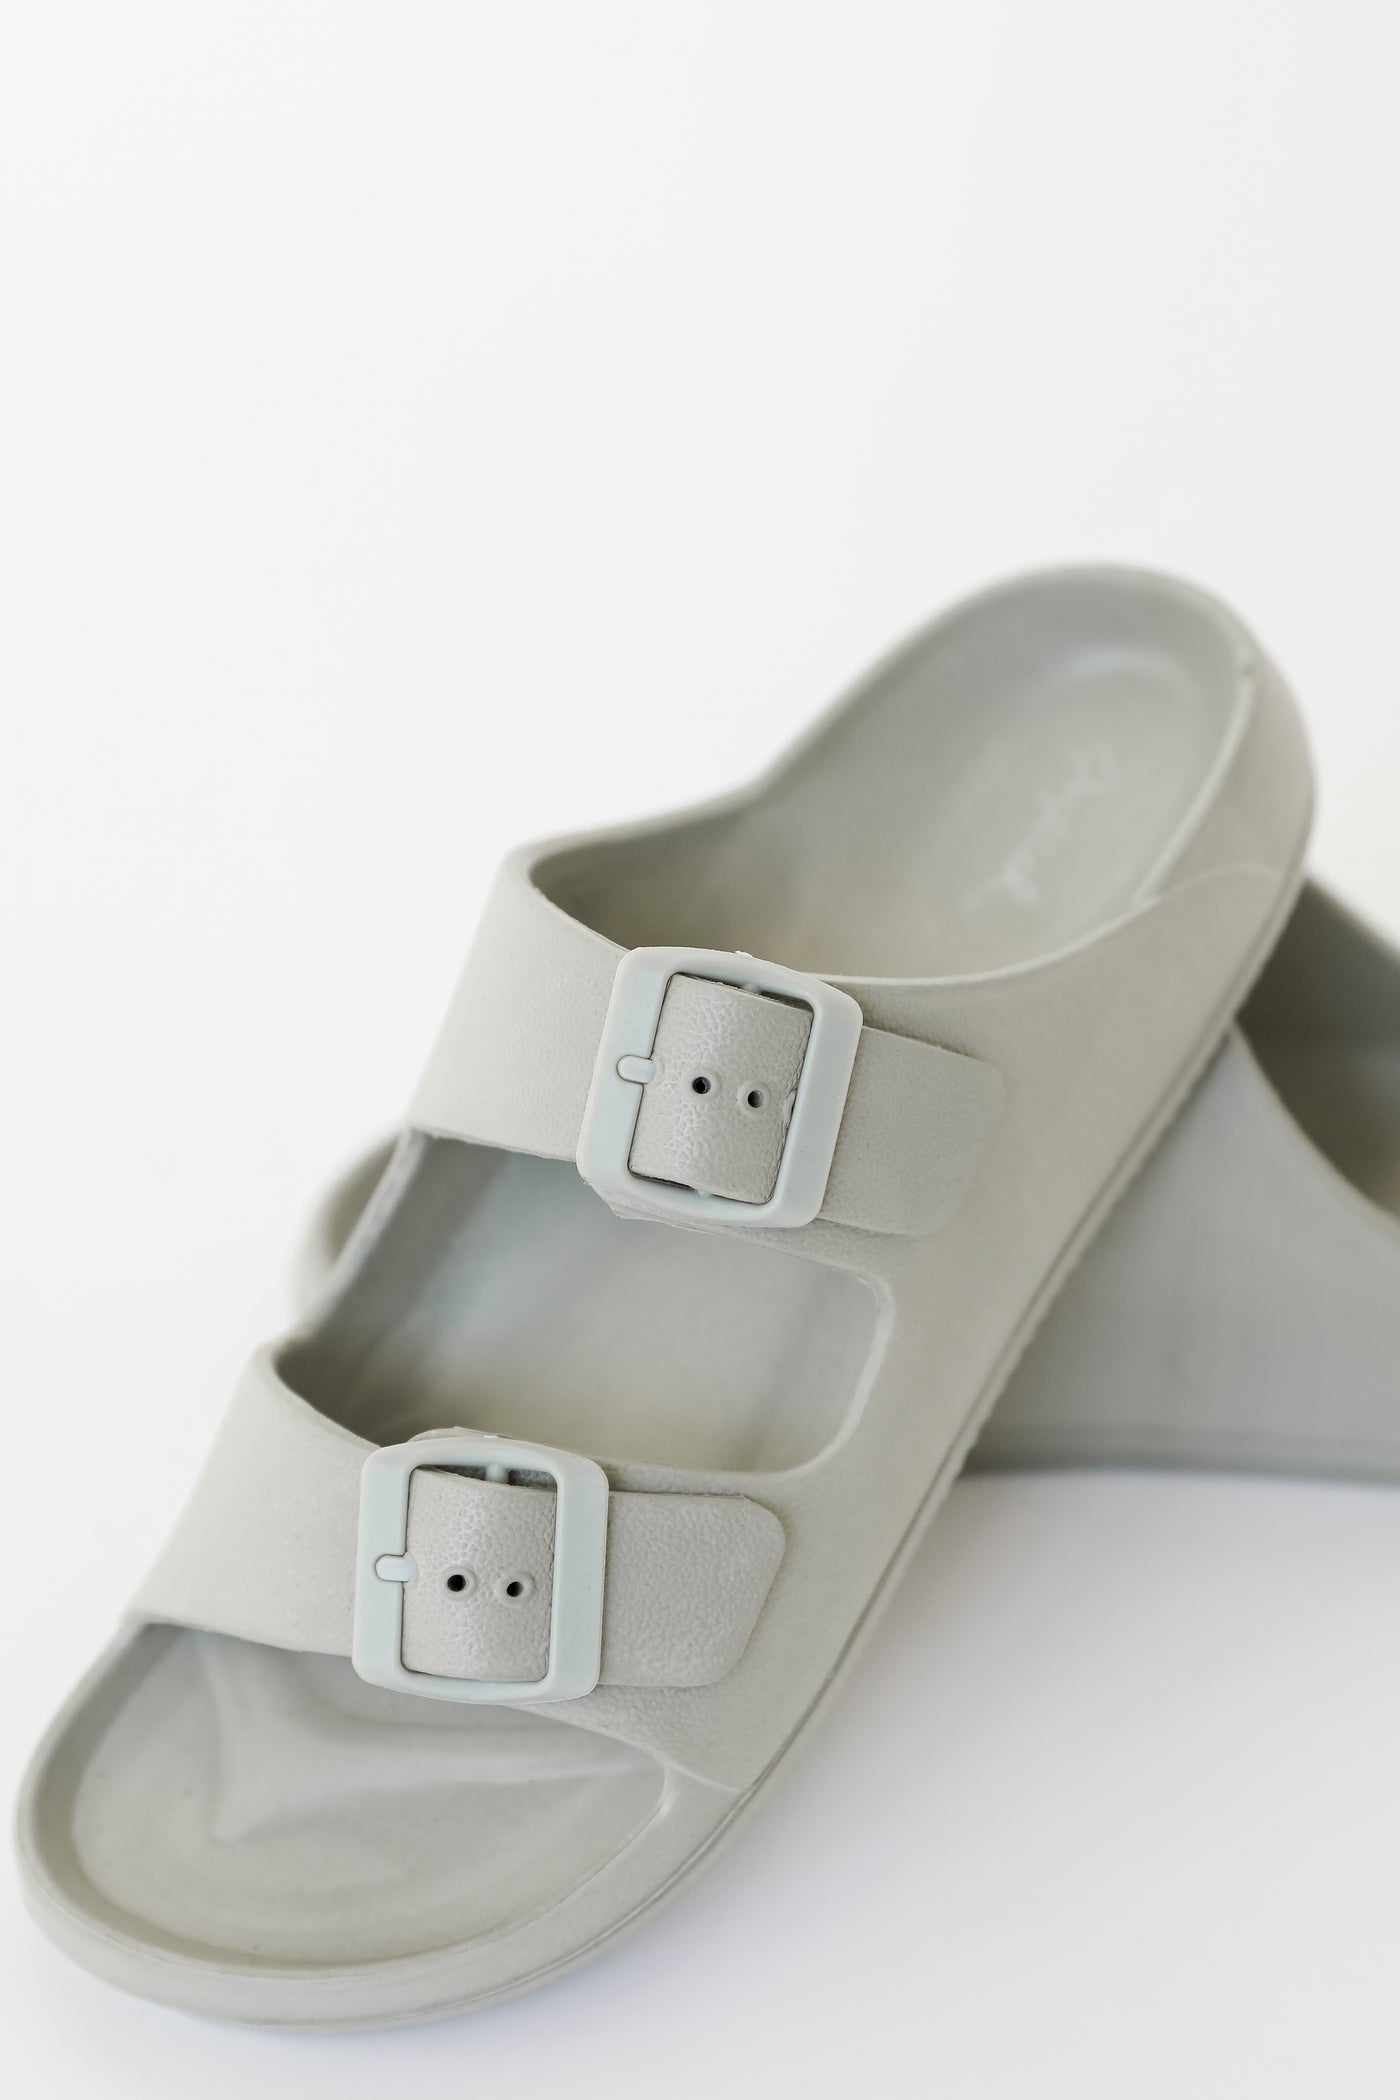 Double Strap Sandals in sage close up